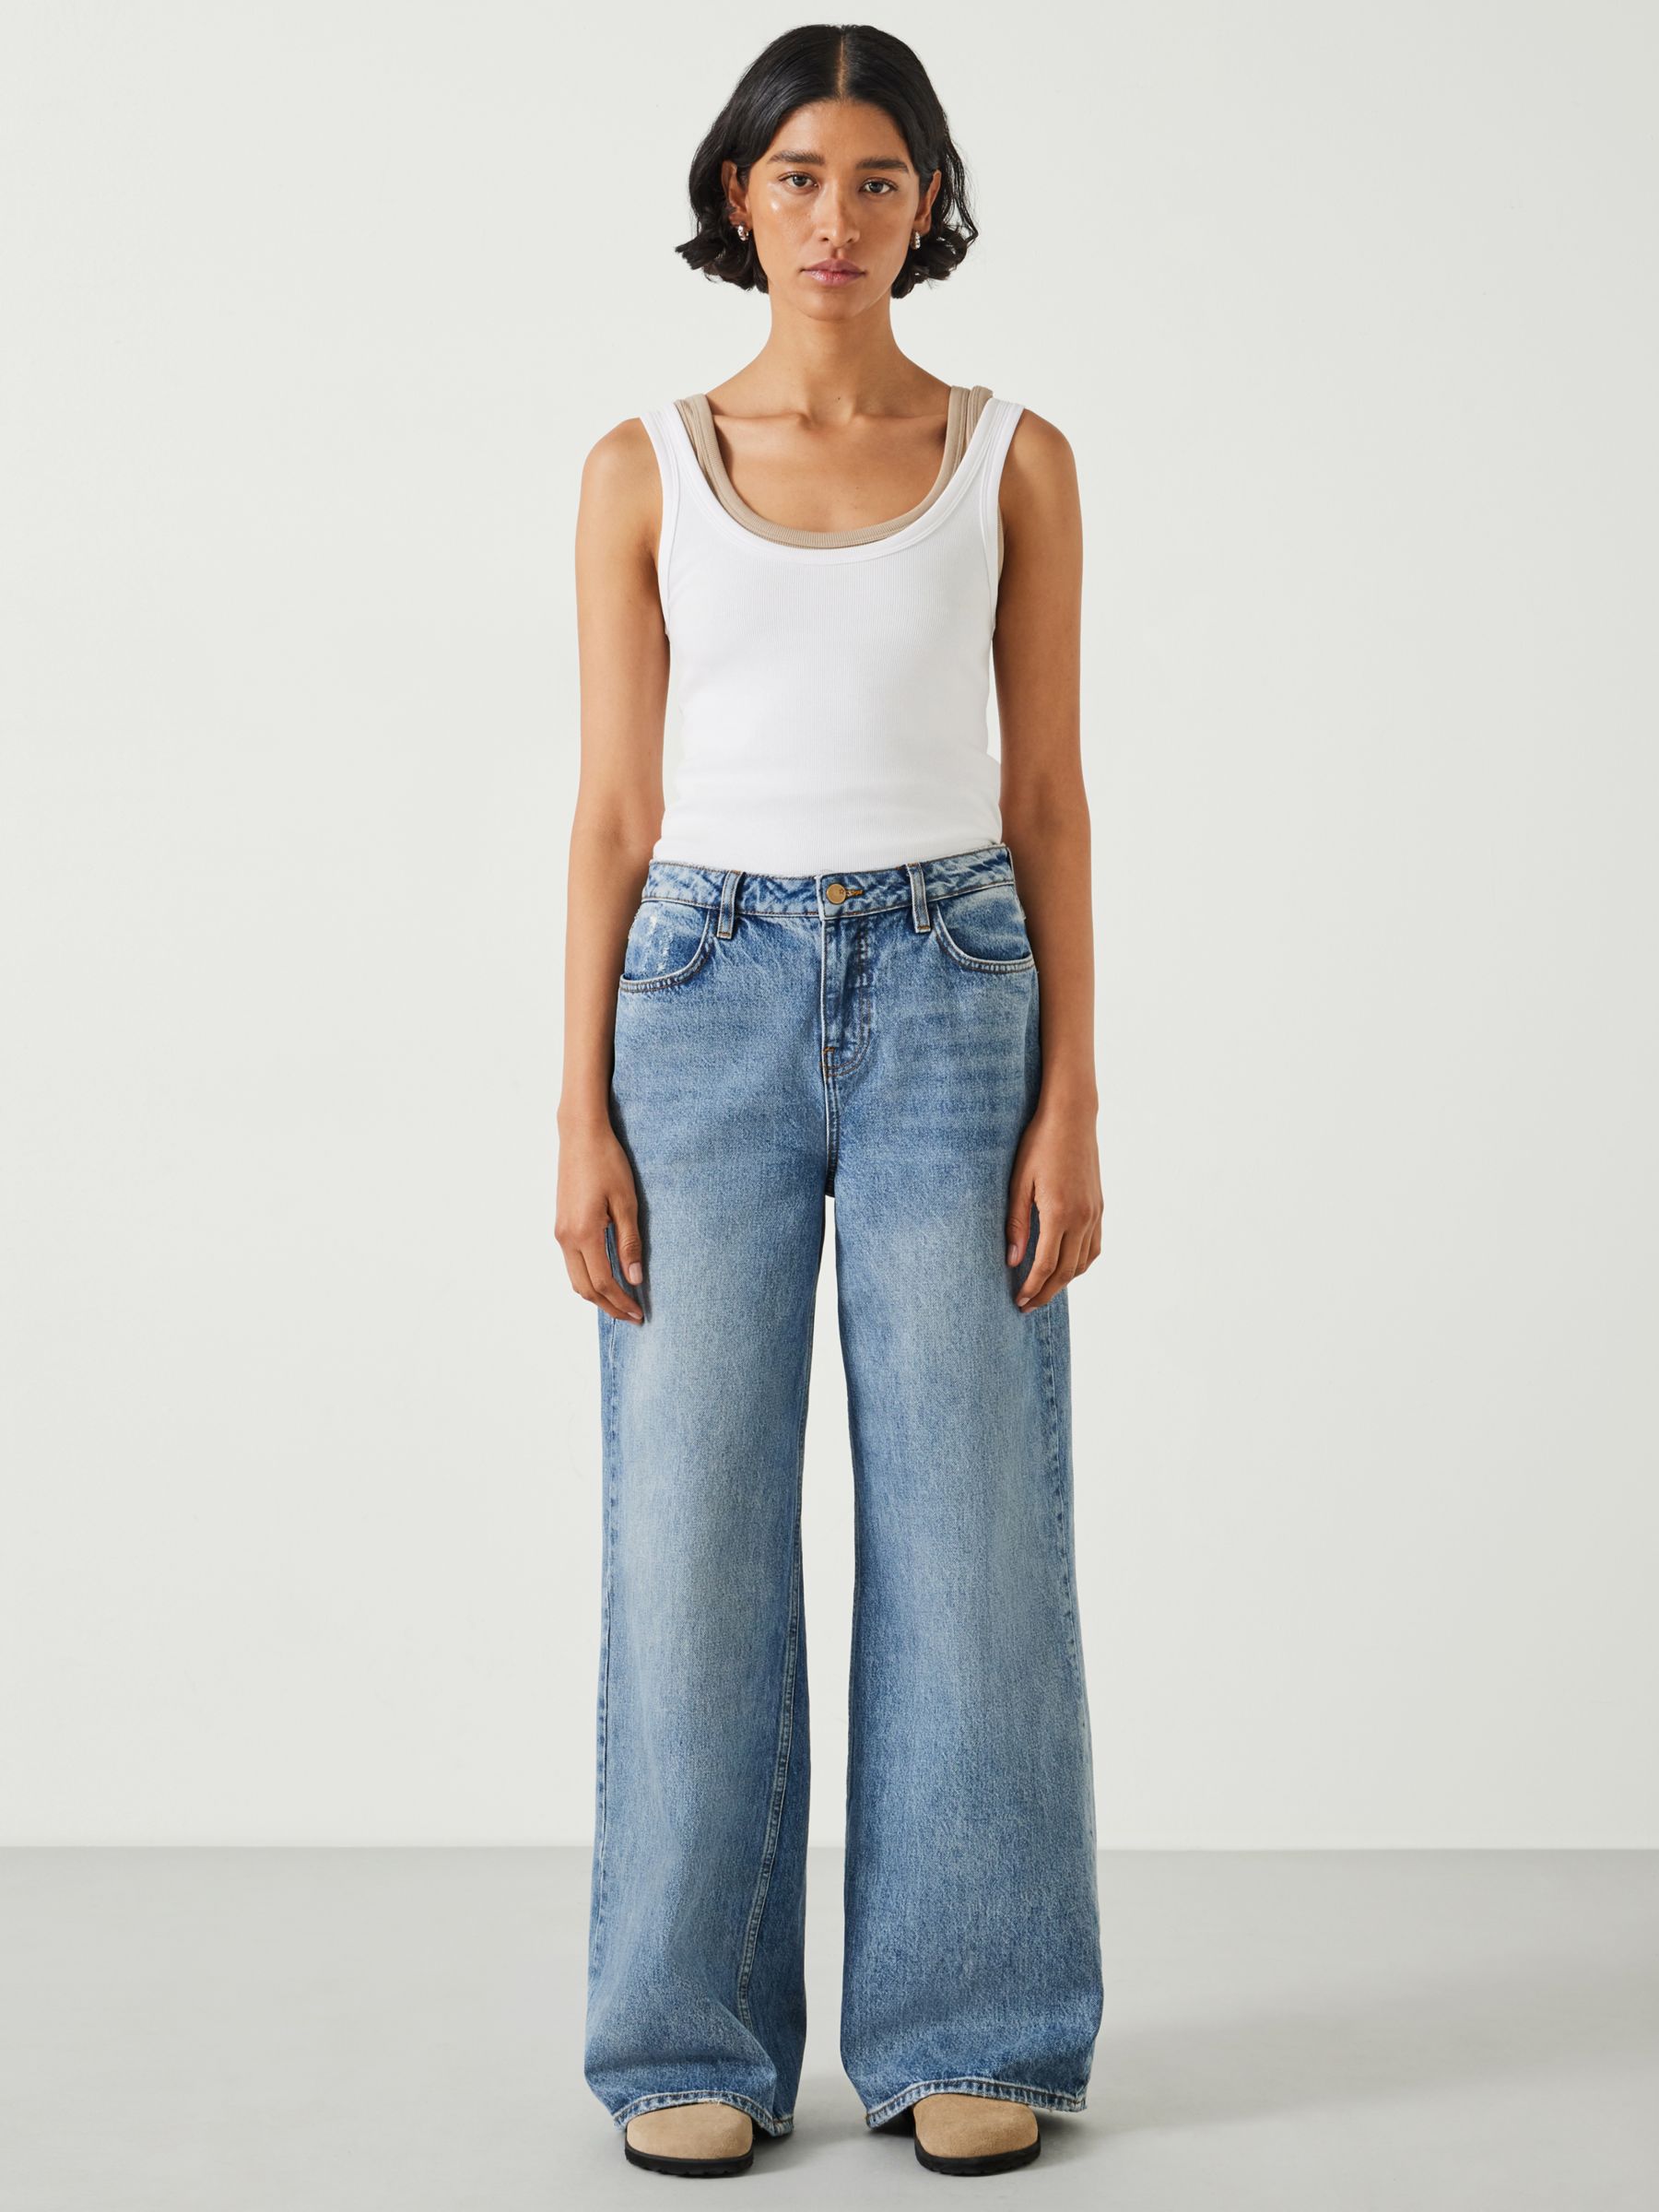 HUSH Abi Wide Leg Jeans, Mid Authentic at John Lewis & Partners